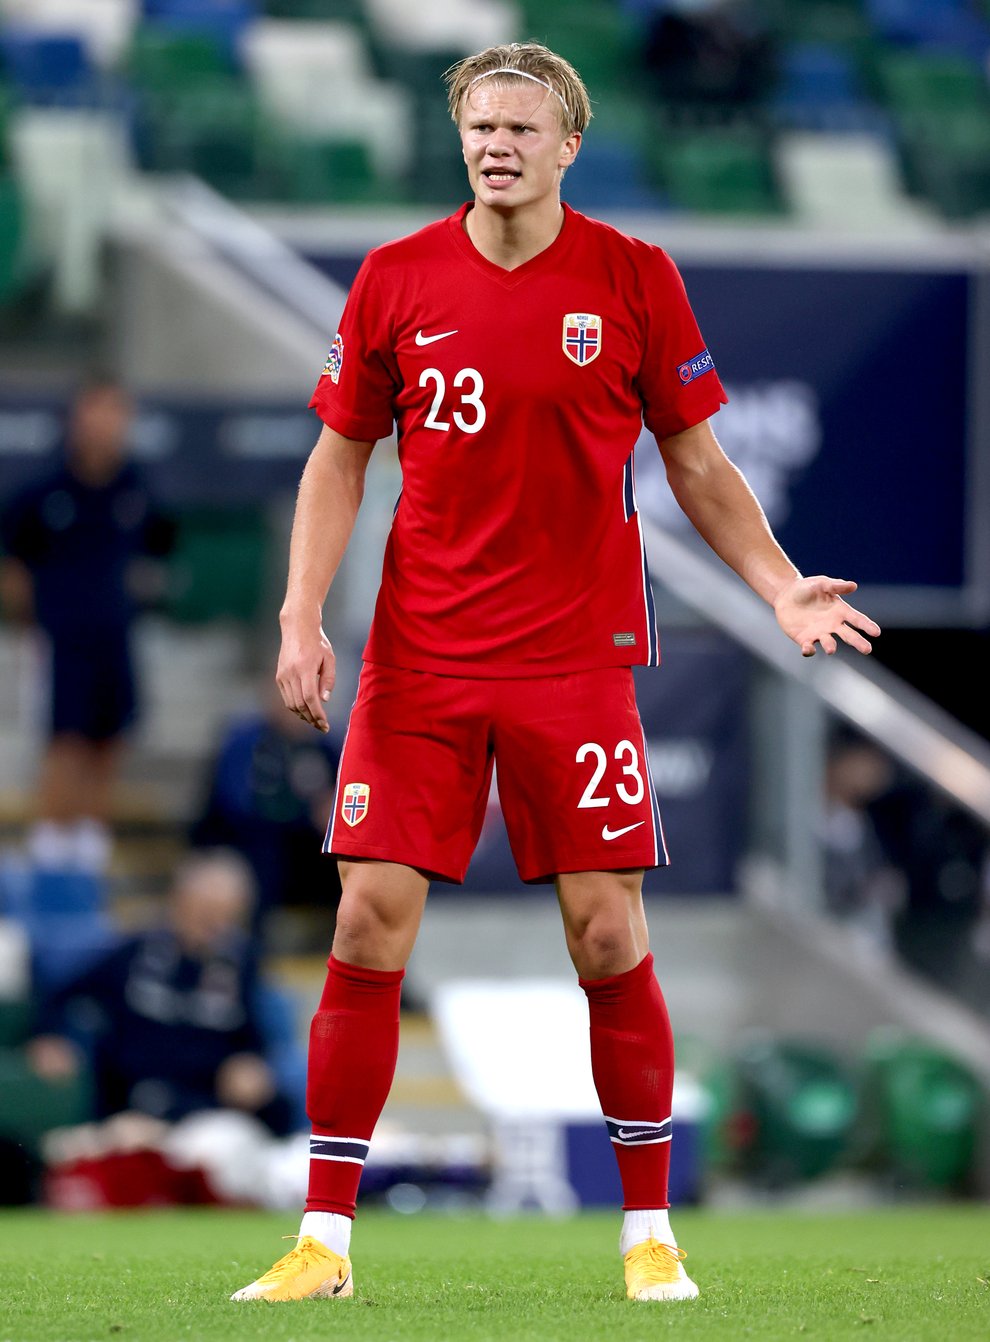 Norway’s Erling Haaland scored twice as Northern Ireland were beaten 5-1 at Windsor Park– UEFA Nations League – Group 1 – League B – Windsor Park